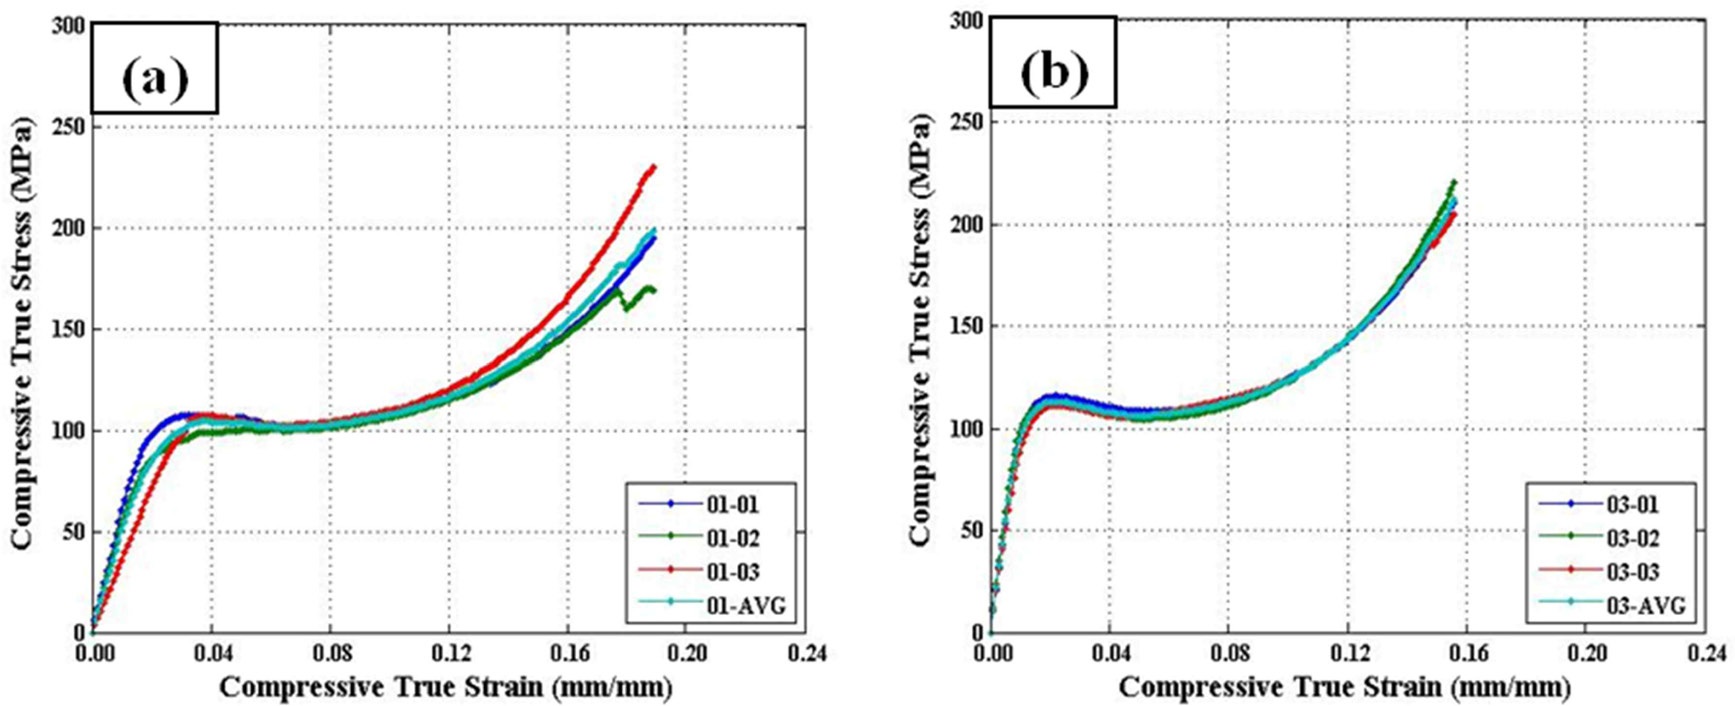 Compressive true stress？true strain curves show good repeatability amongst all configurations, while (a) configuration 01 showed the widest
degree of scatter, although the data did seem to bound itself with no significant outliers, and (b) configuration 03 showed the most consistency with very
little scatter.